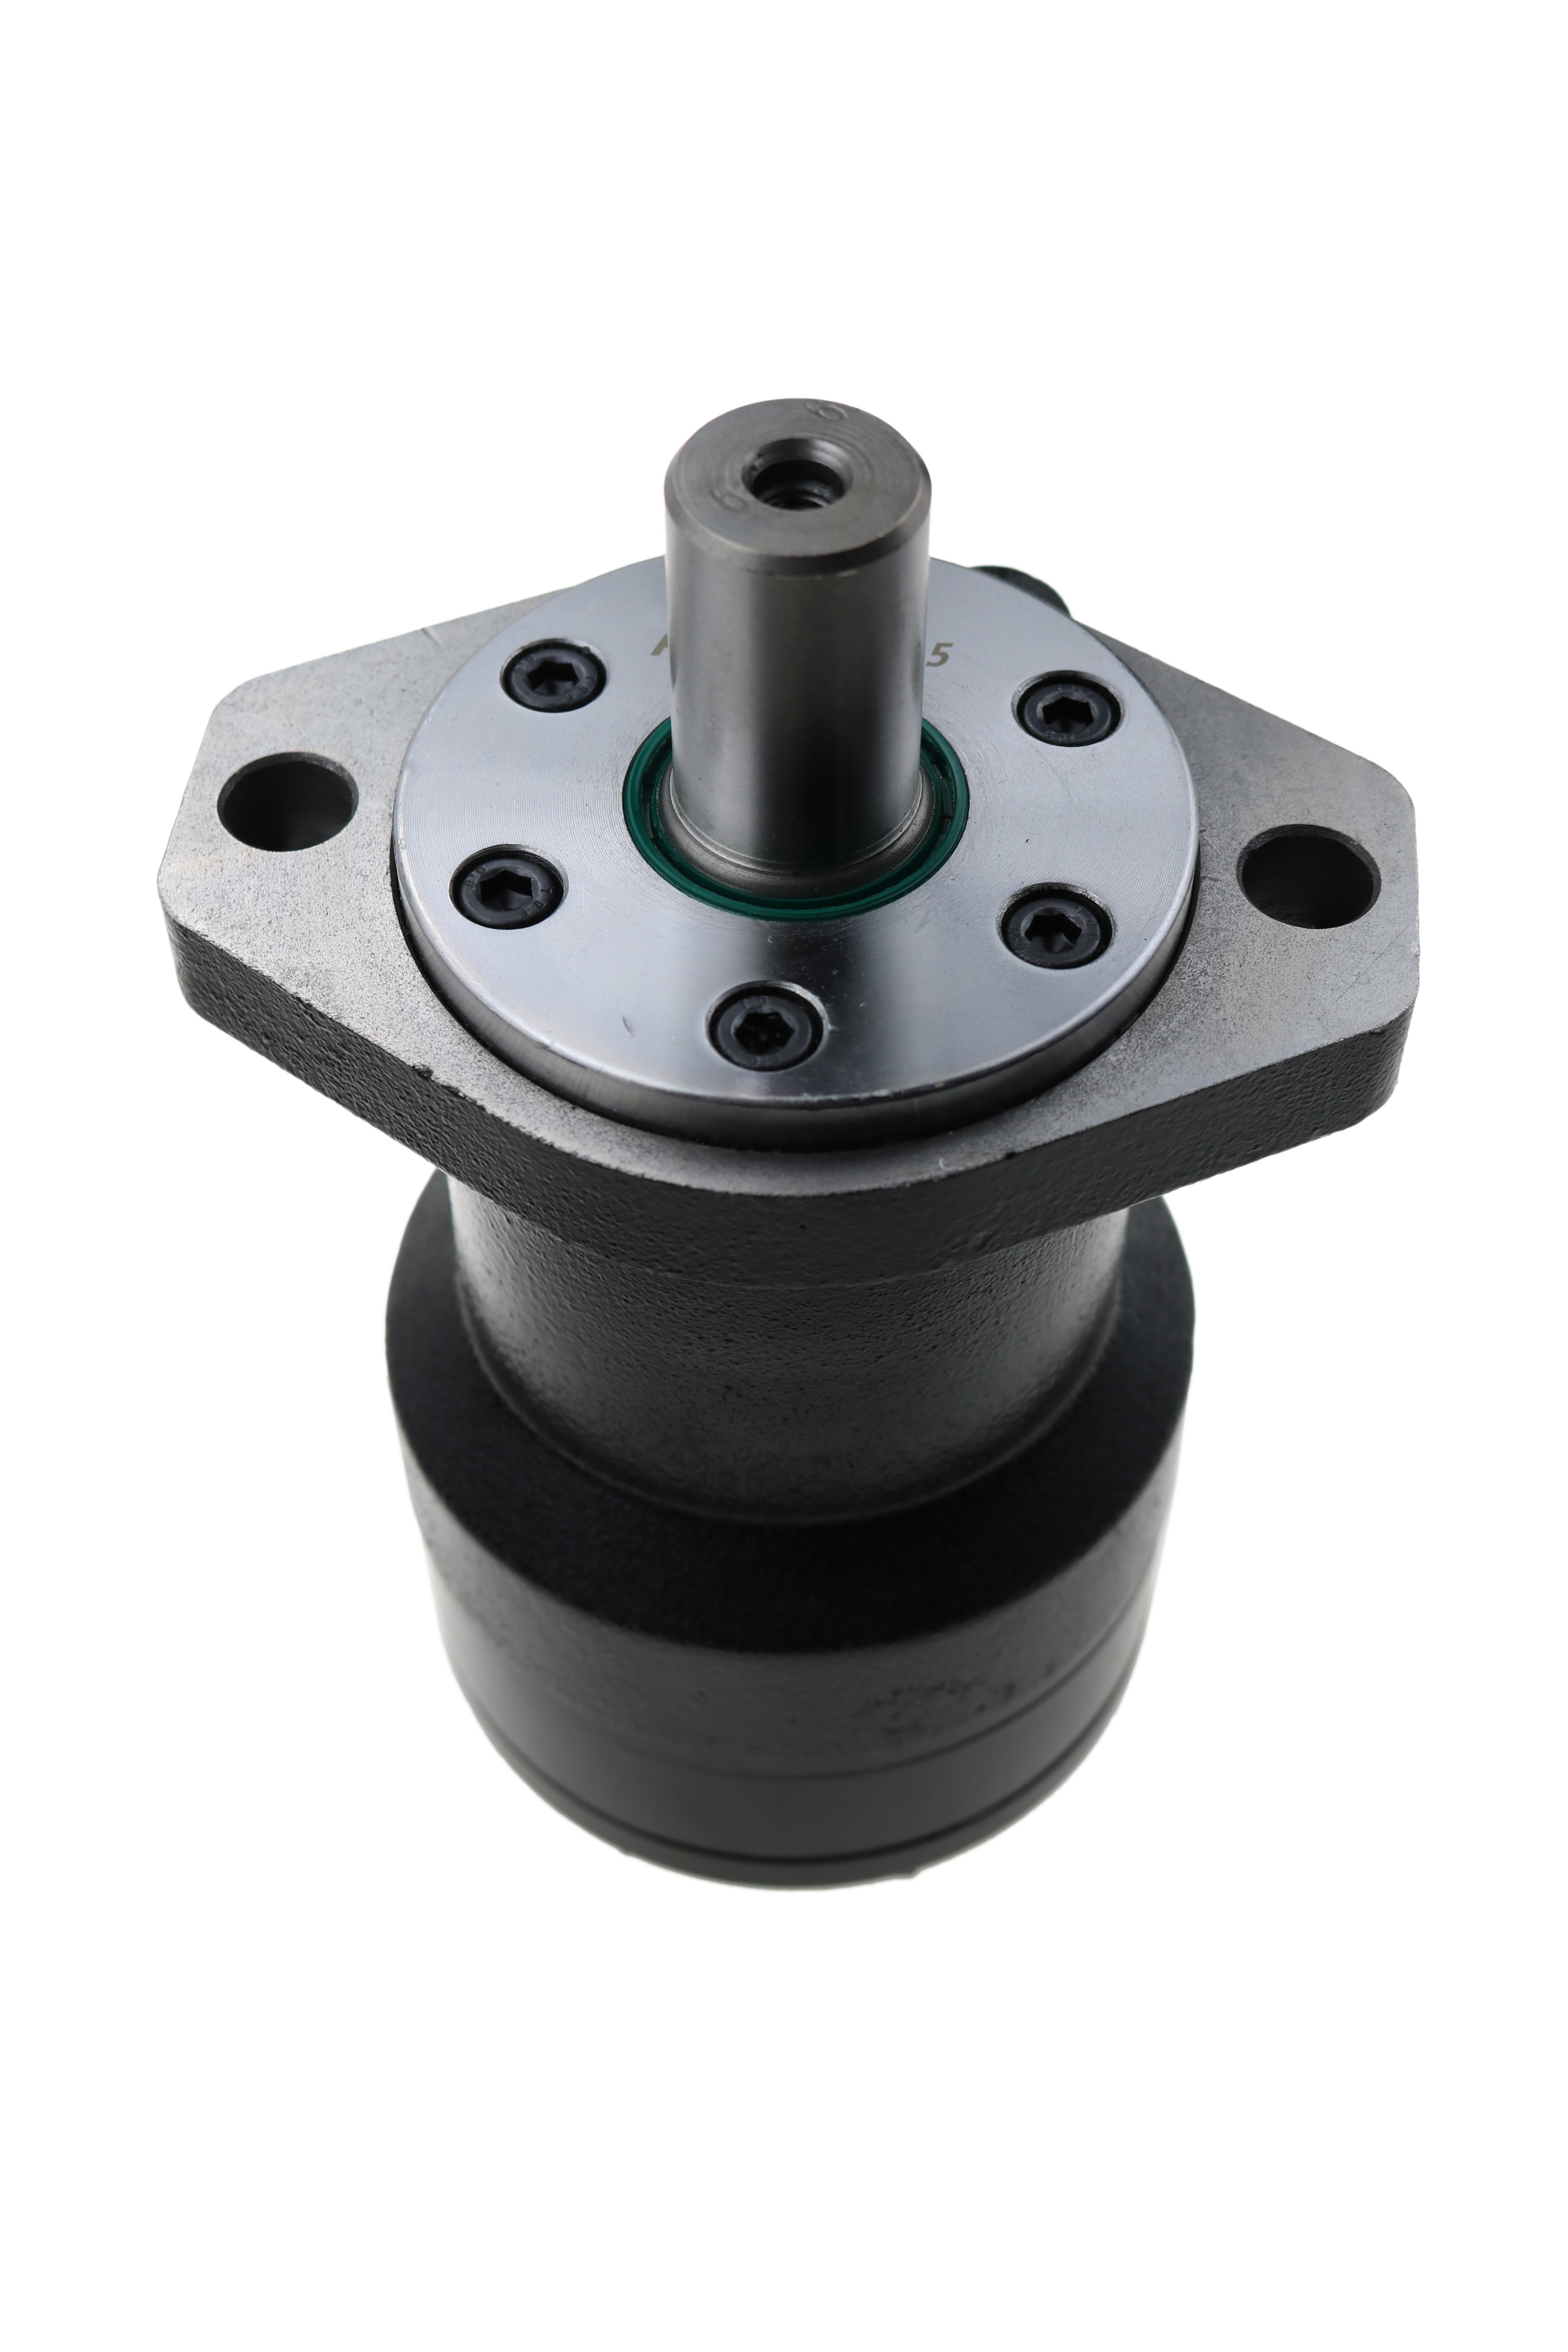 Hydraulic Motor Replacement for Danfoss BM2 OMR series 2-Bolt Mounting Flange ,G1/2 NPT Ports